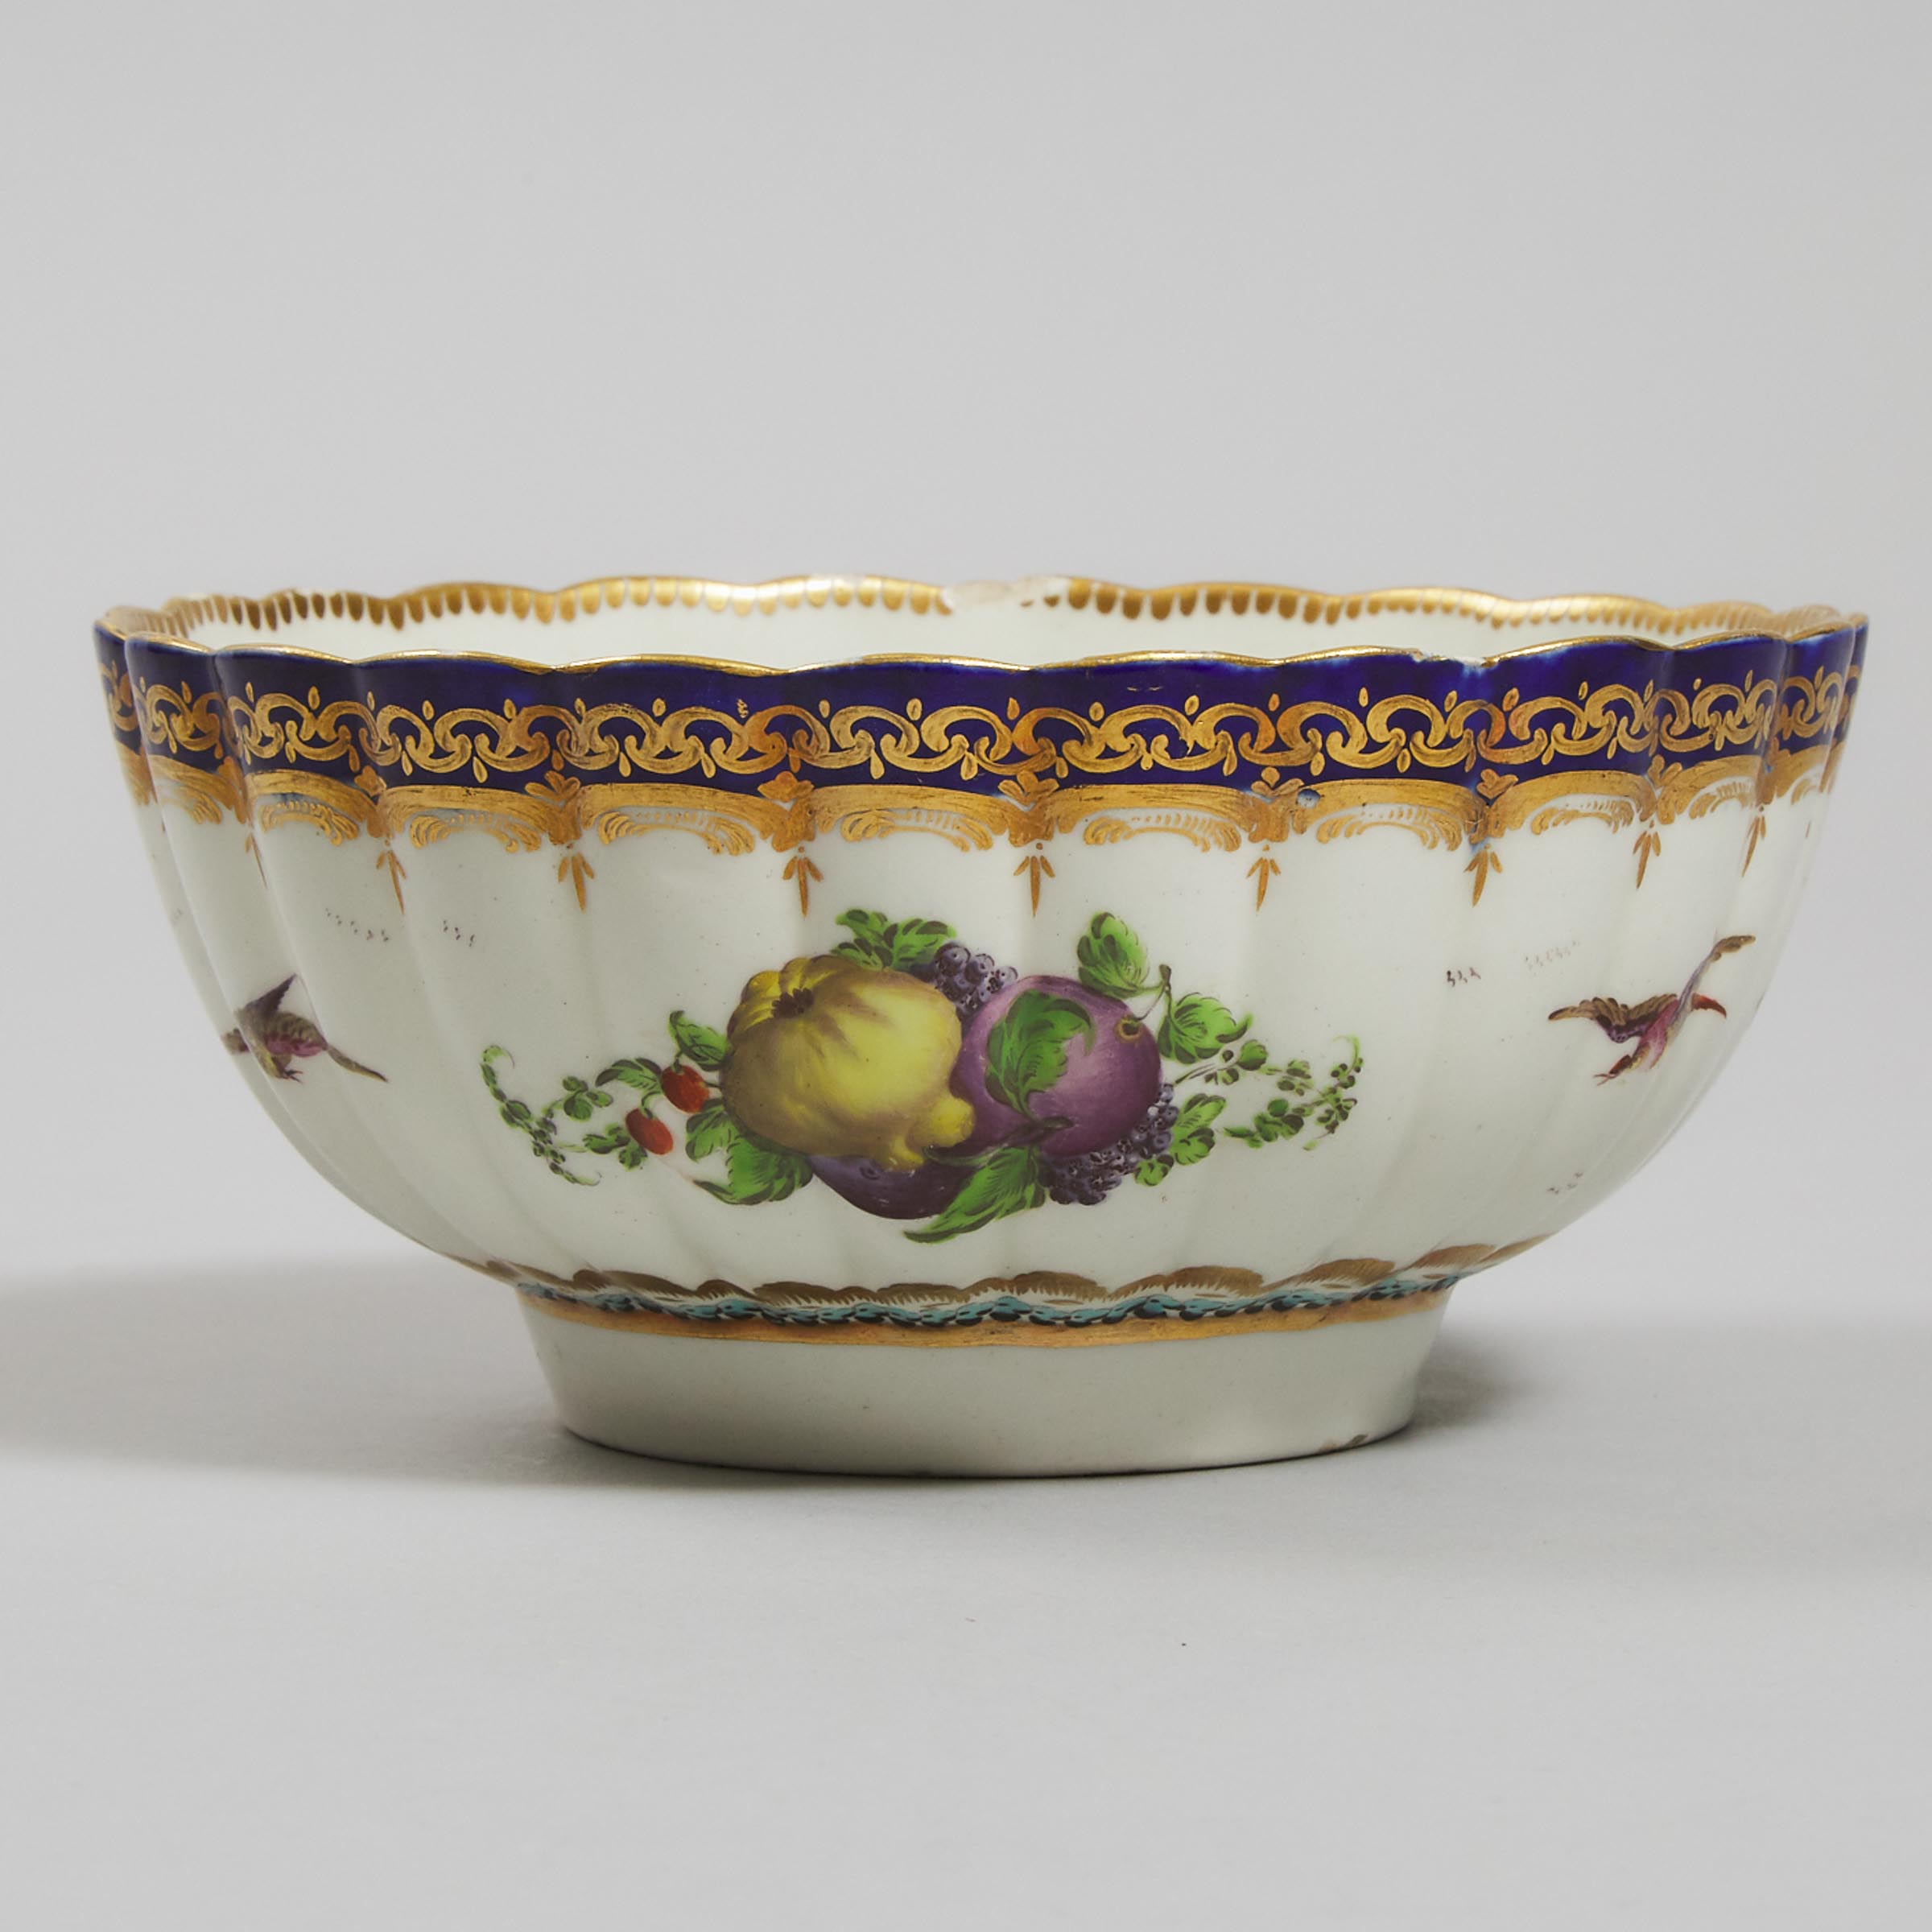 Worcester 'Lord Henry Thynne' Pattern Fluted Bowl, c.1775-80